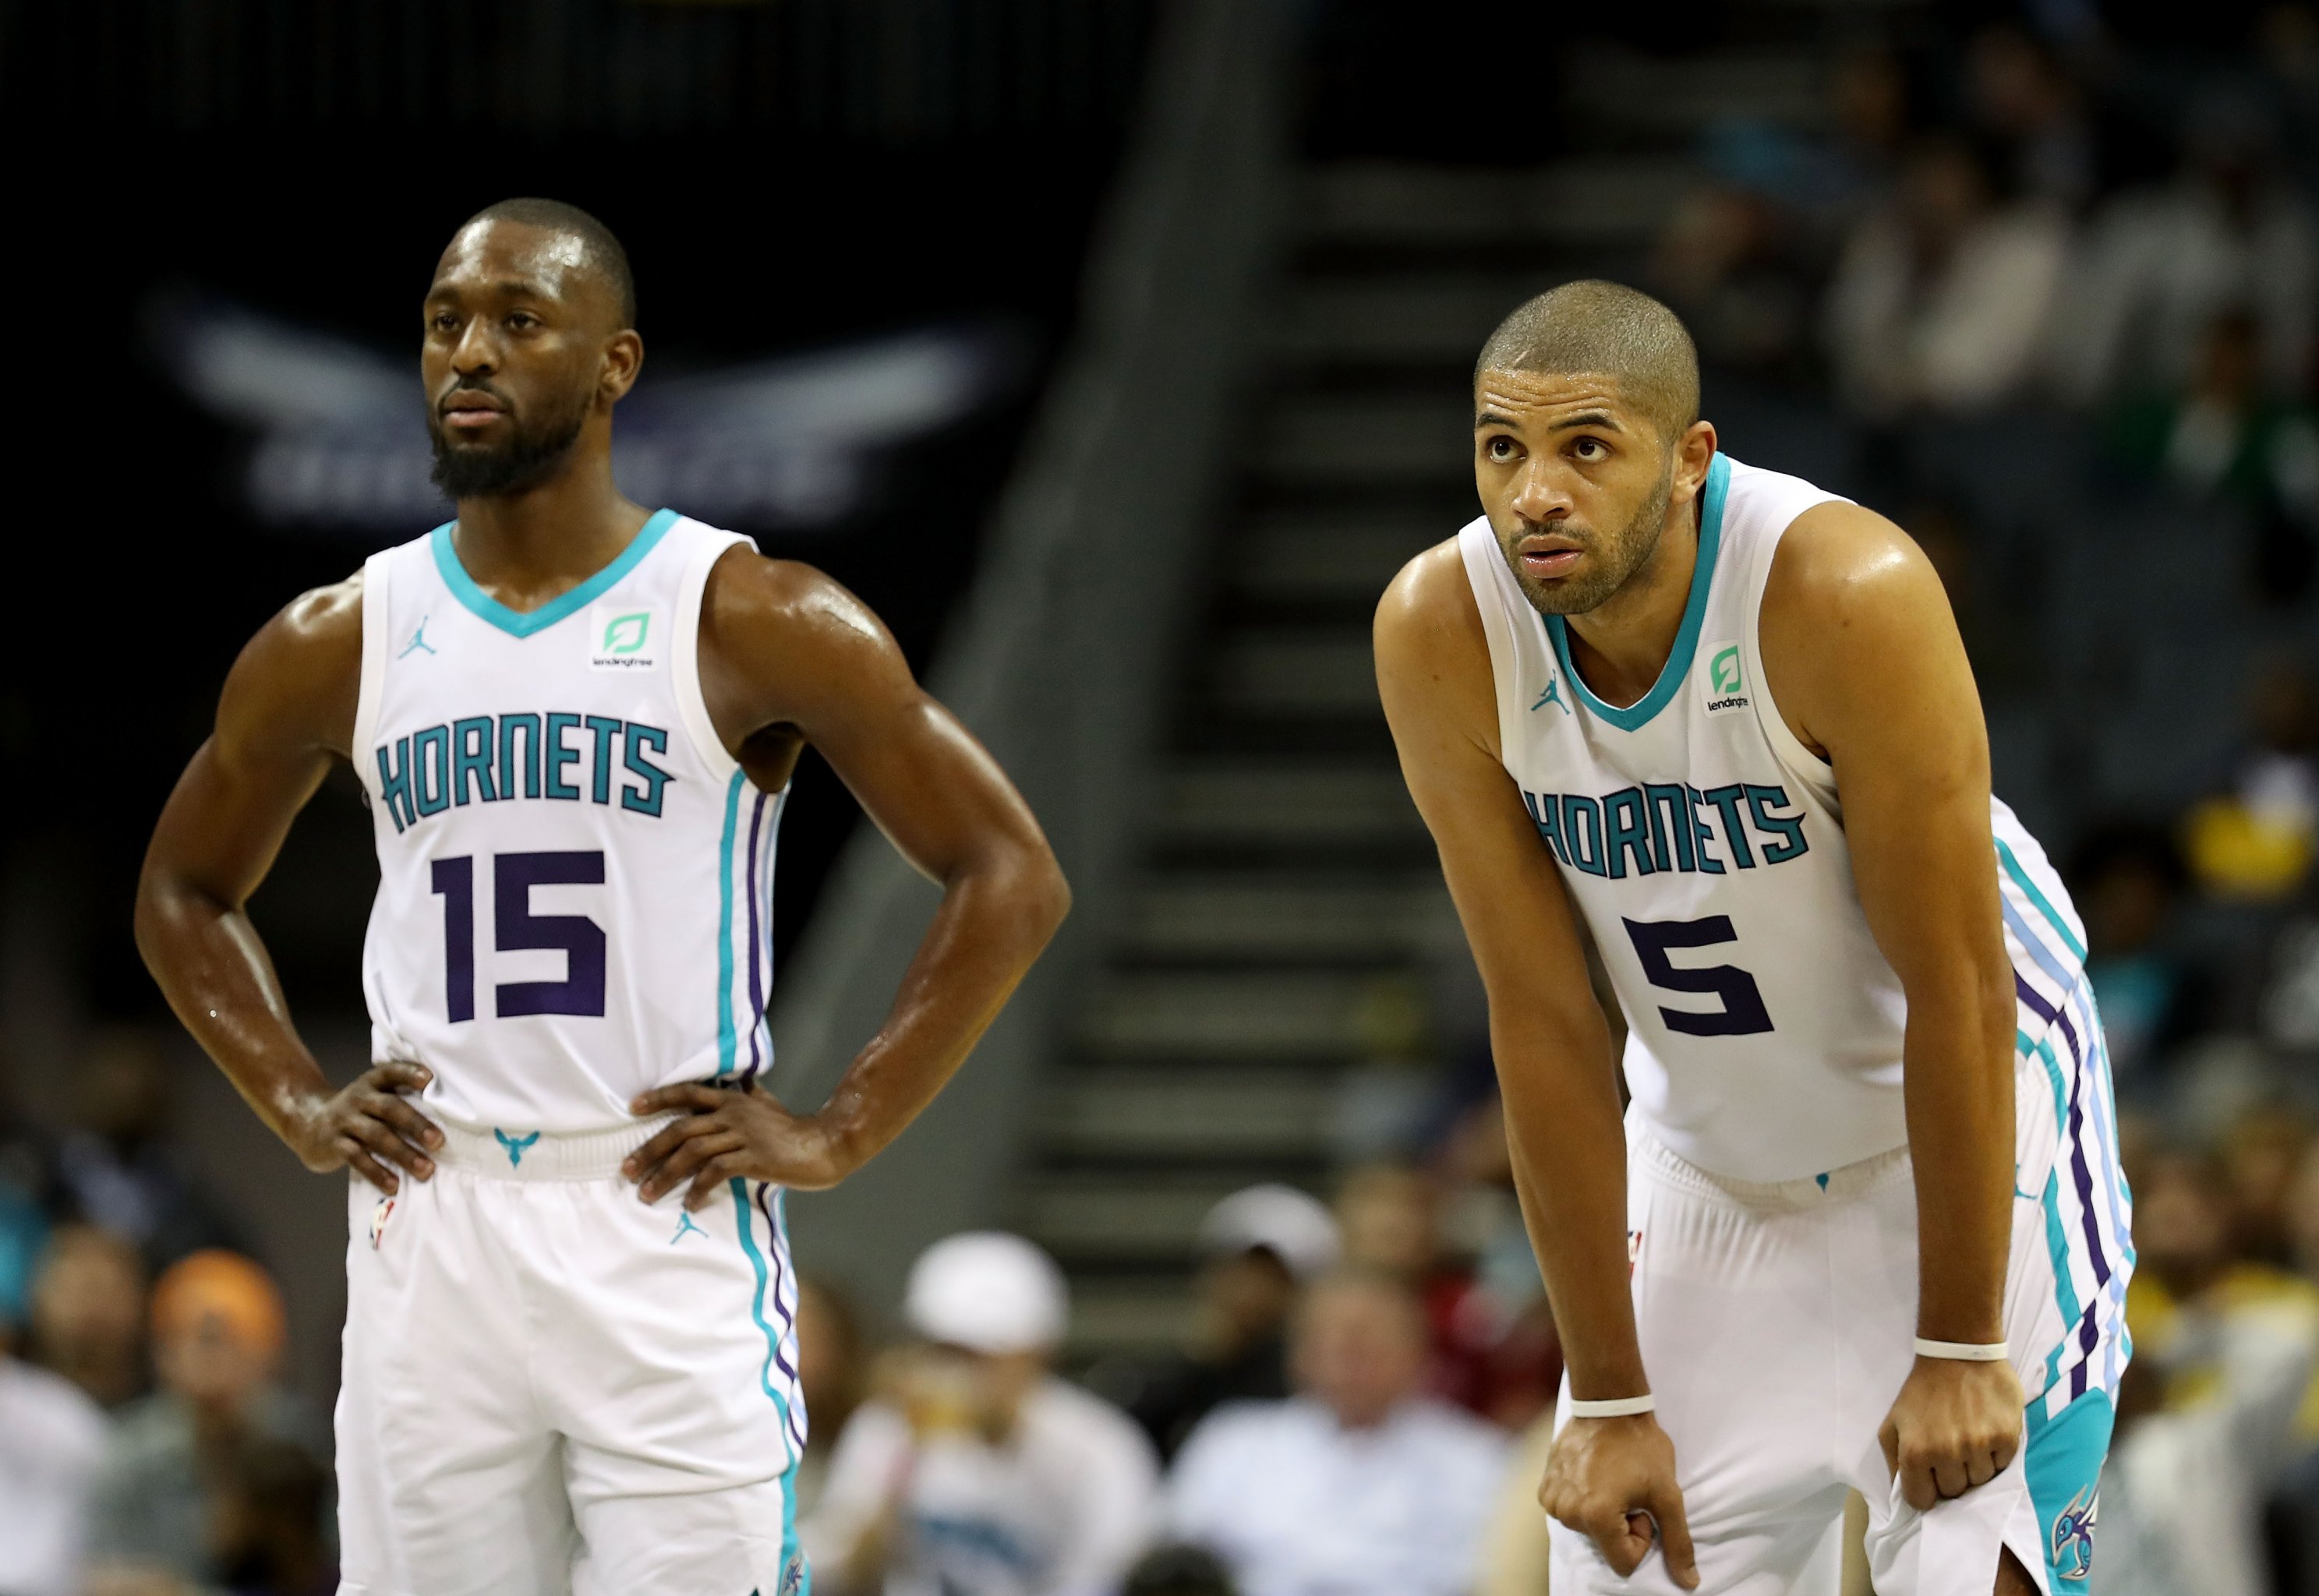 Dion Waiters, E'twaun Moore, and D.j. Augustin by Jonathan Daniel